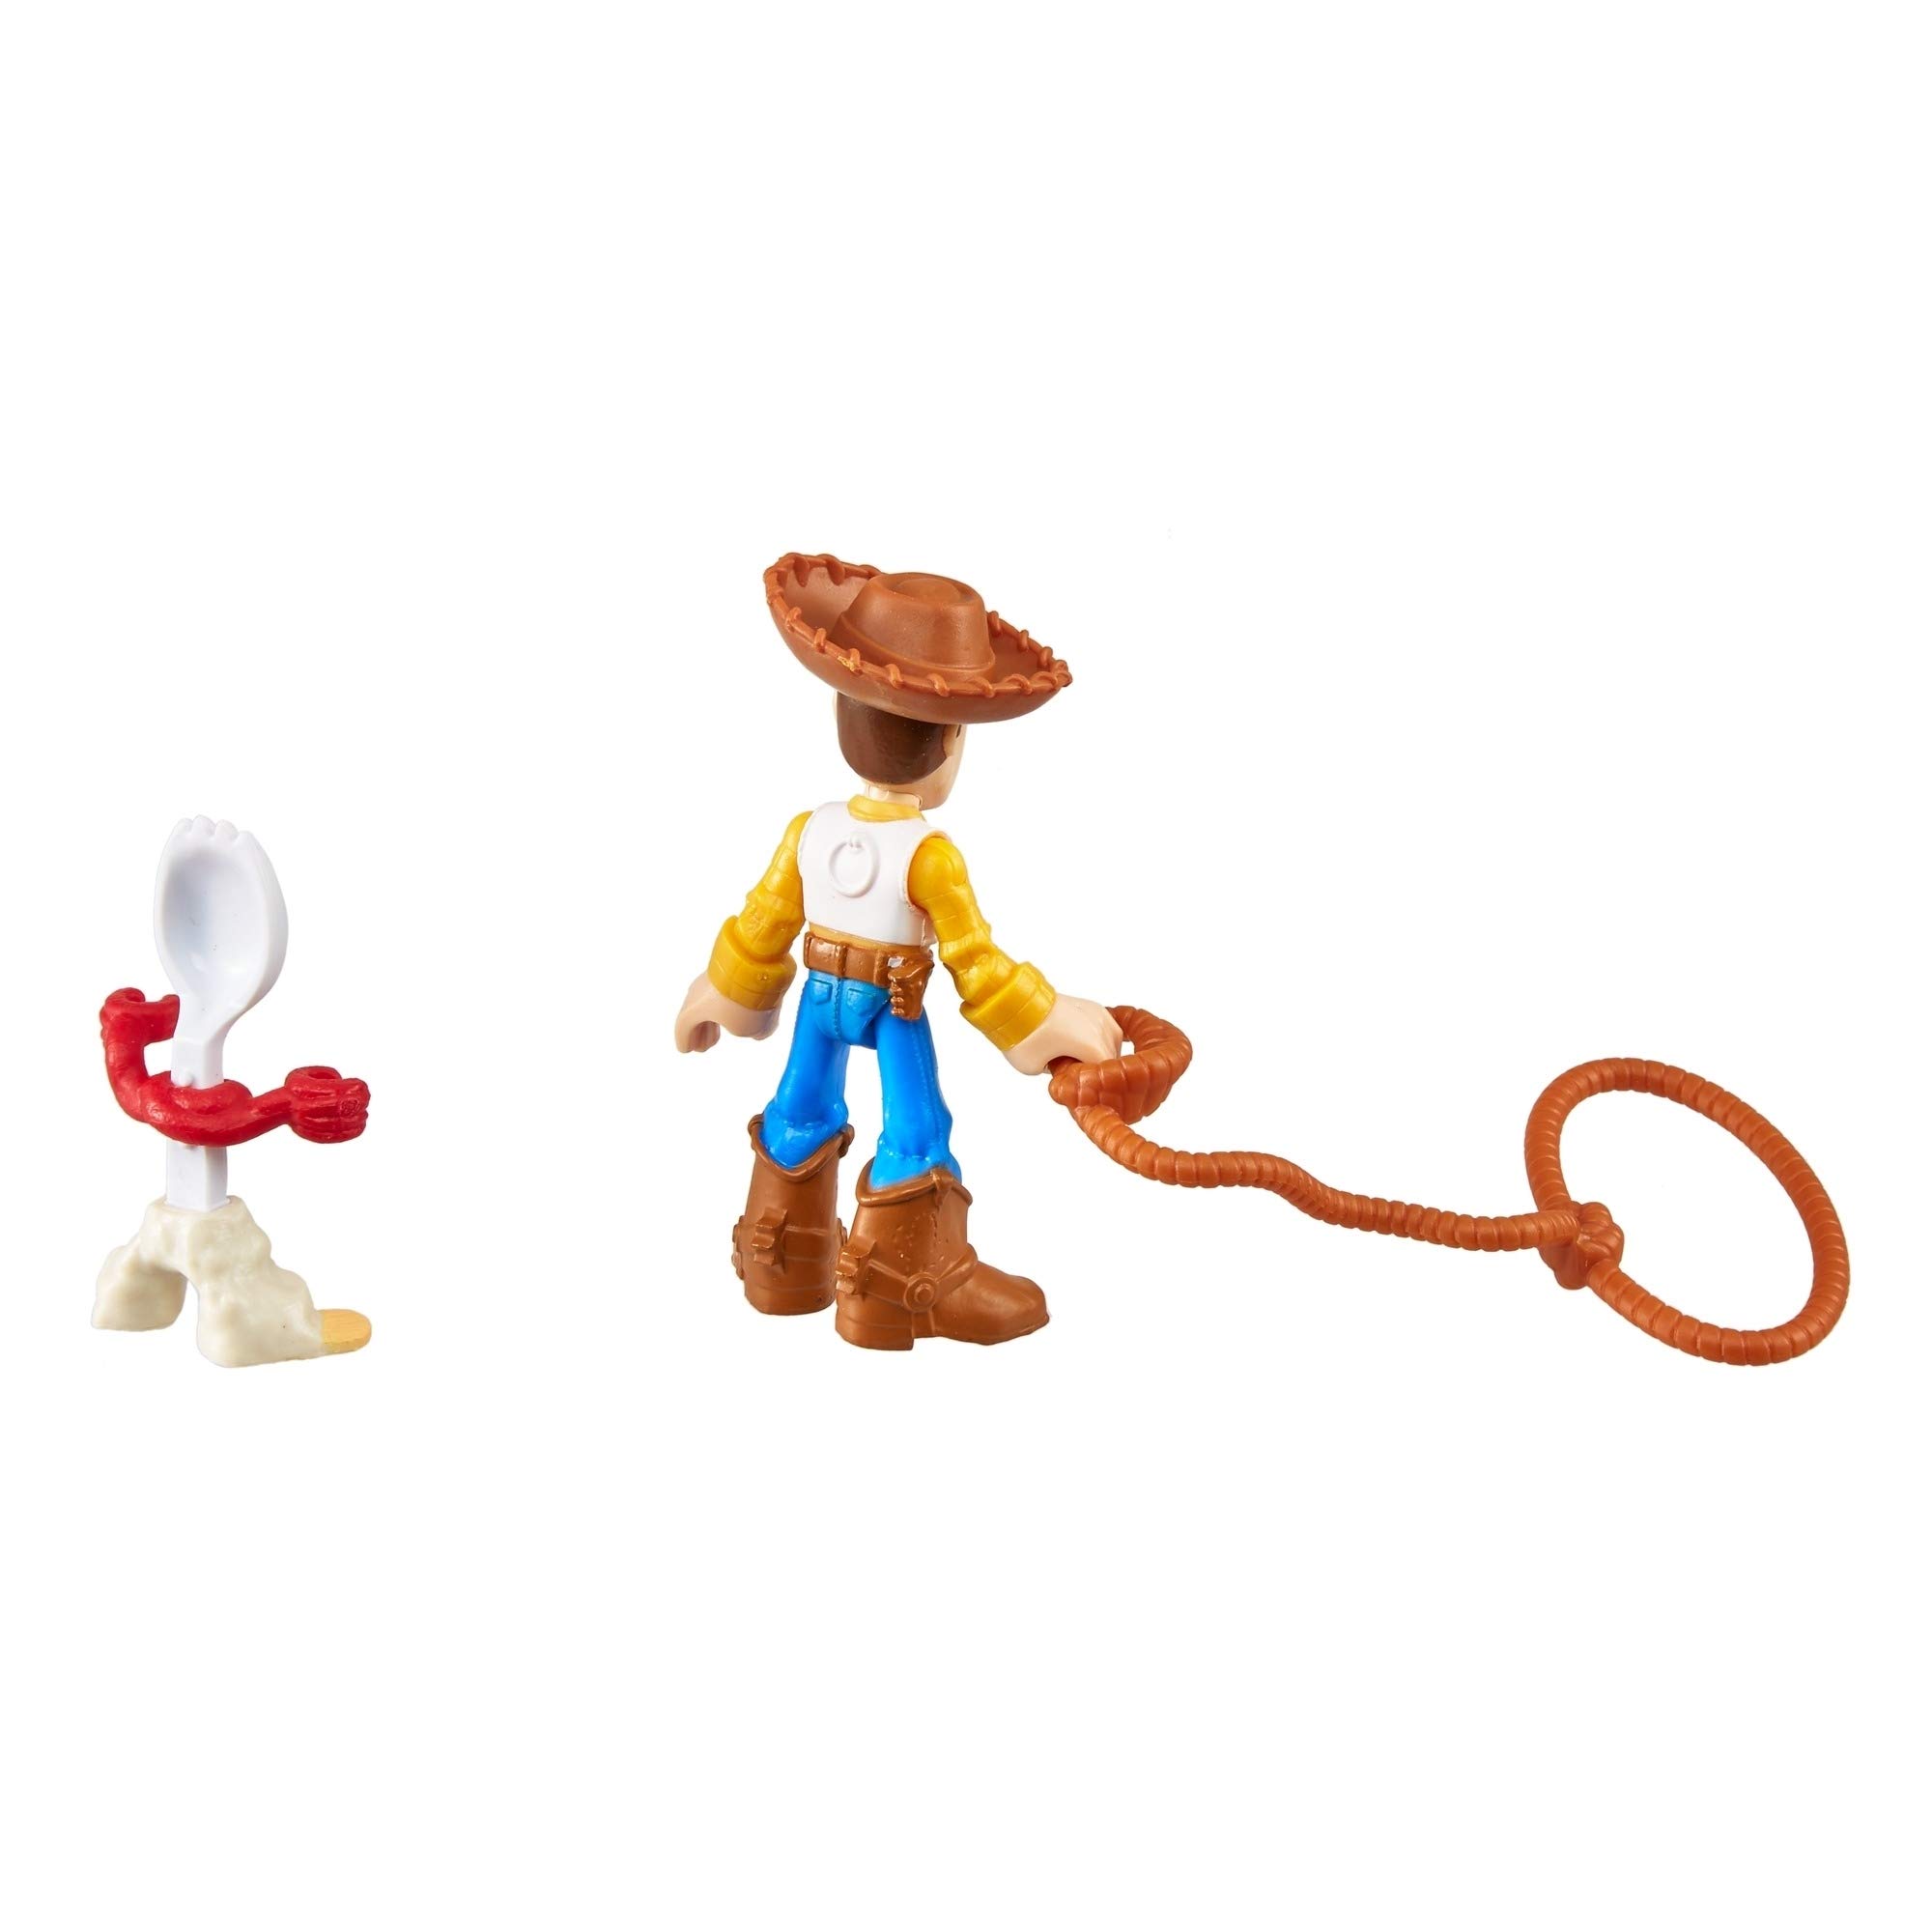 Fisher-Price Imaginext Disney Pixar Toy Story 4 Woody & Forky Figure 2-Pack